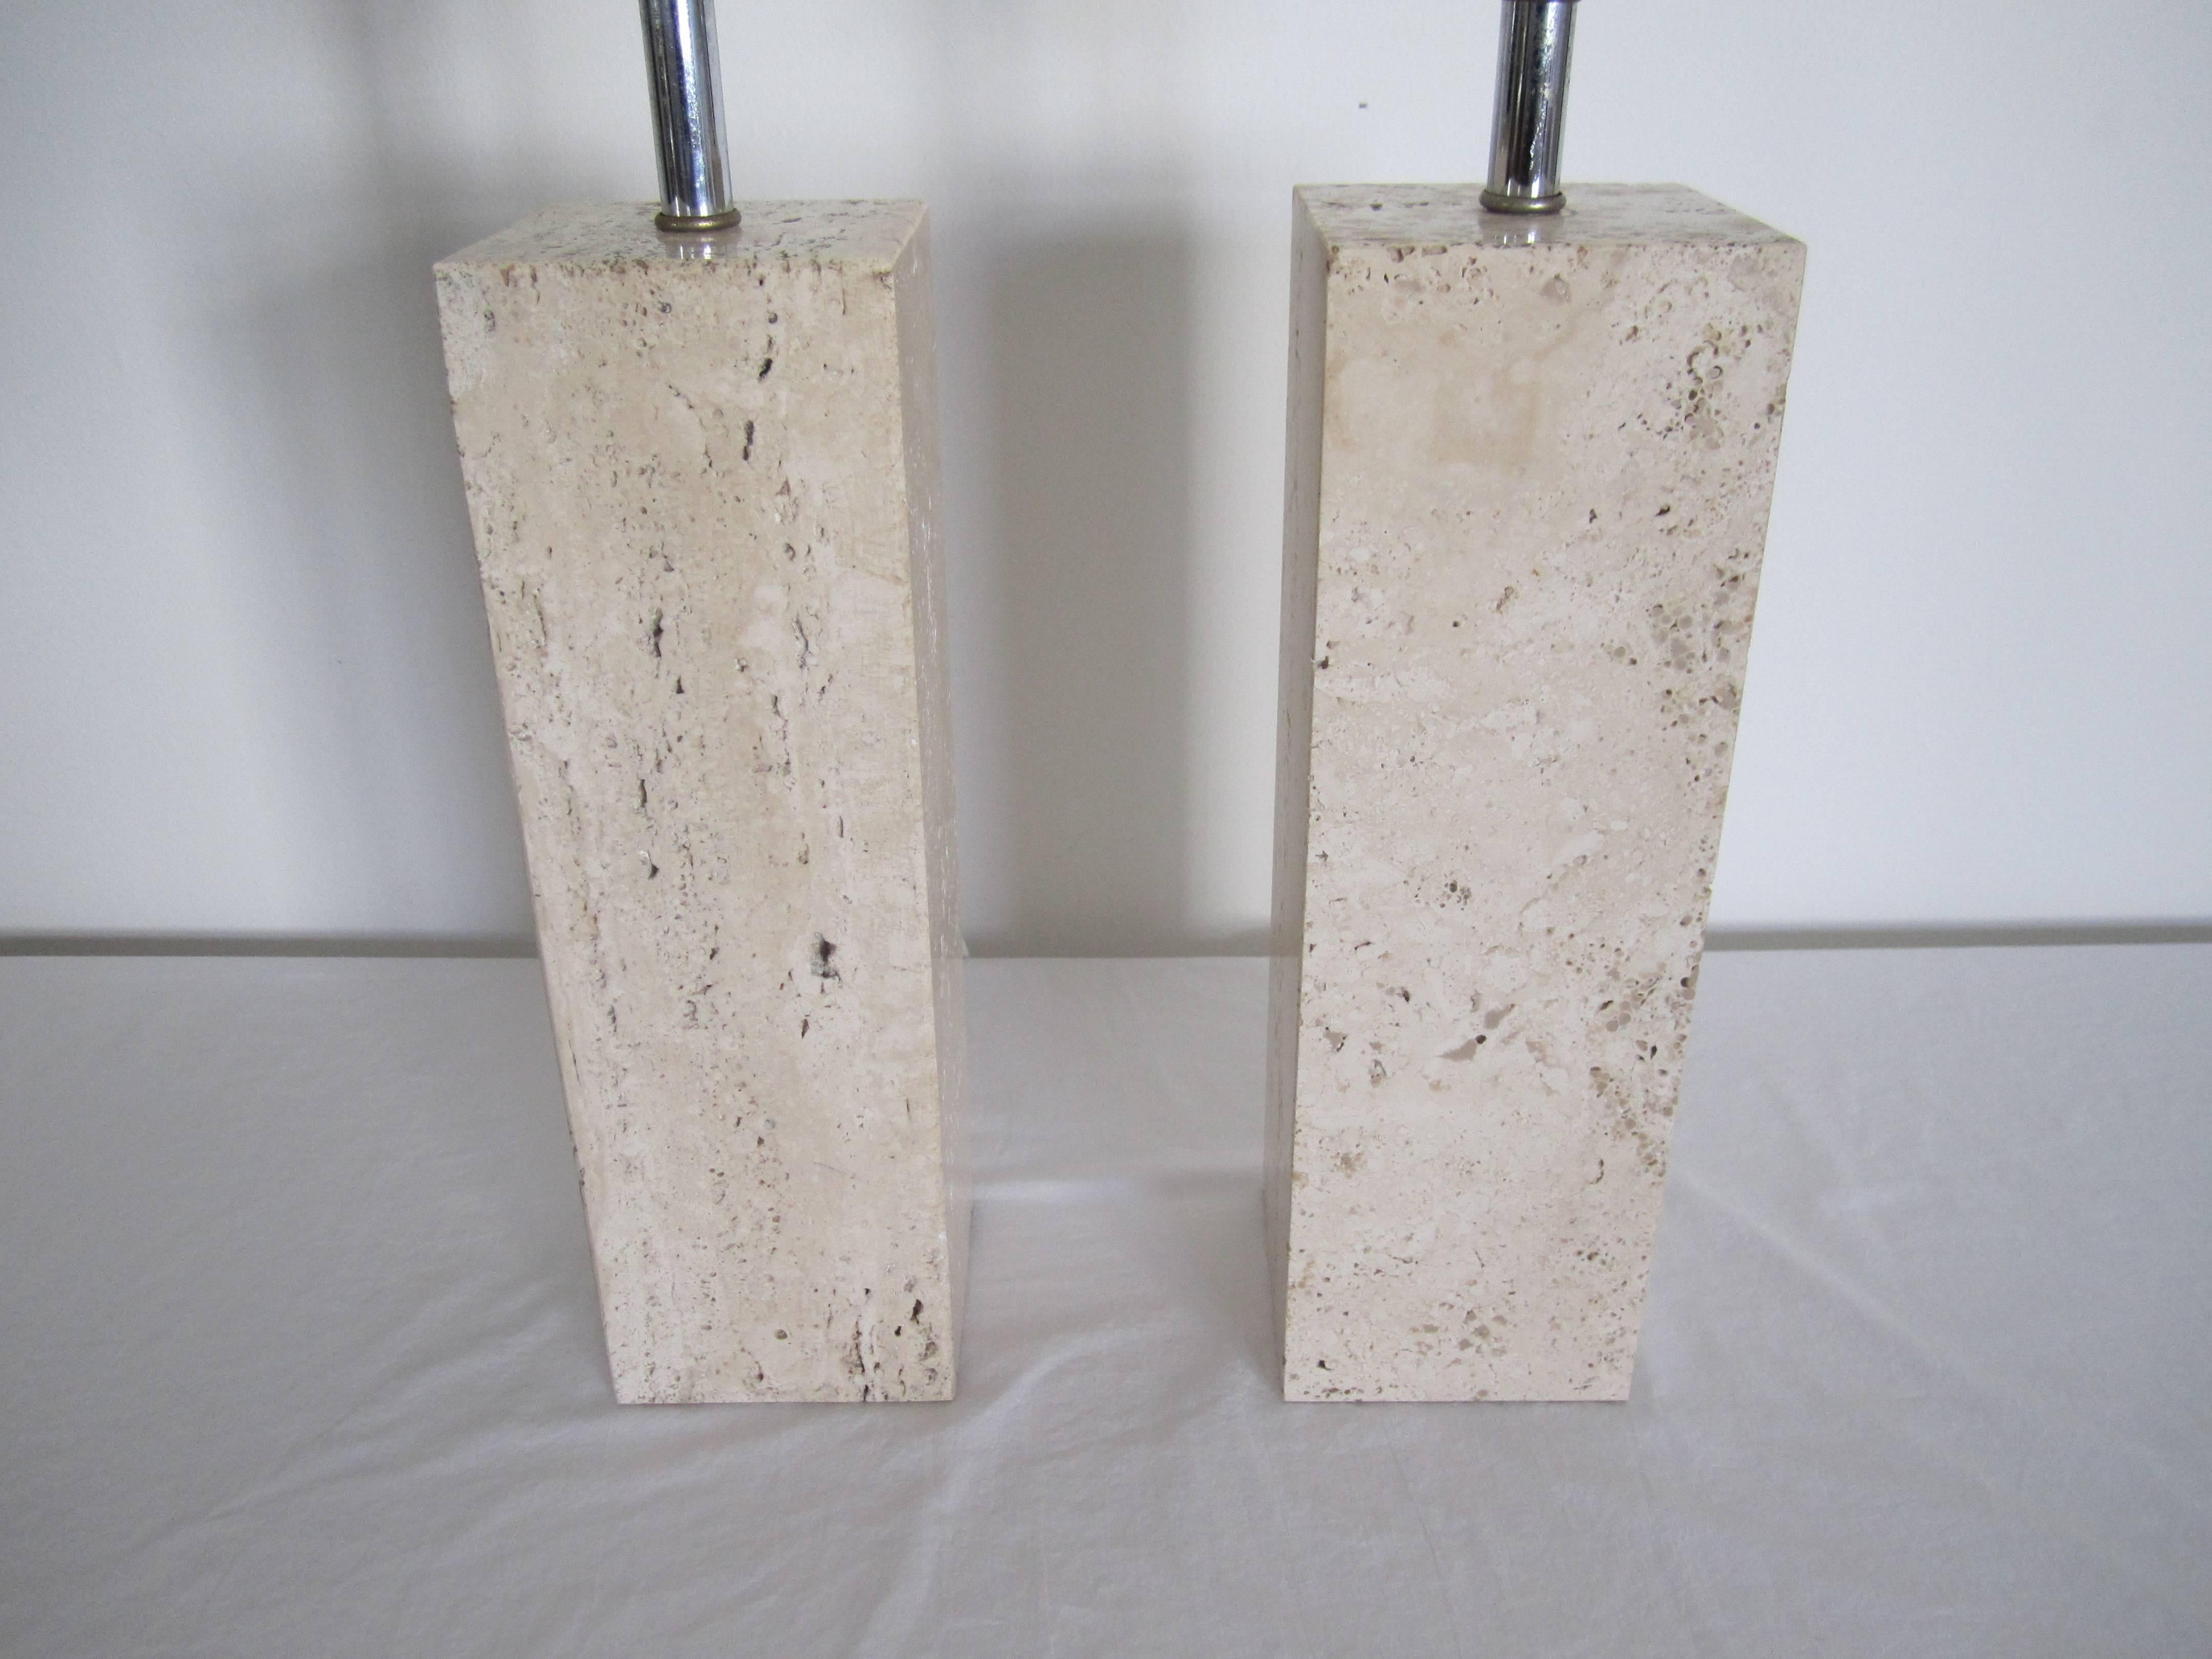 A pair of Italian Modern solid cream or sand colored travertine marble table lamps. Italy, circa 1960s -1970s. Shades included. 

Some additional measurements: 12 in H to top of travertine. 17 in. H to top of socket. 26 in. to top of finial. 

Pair